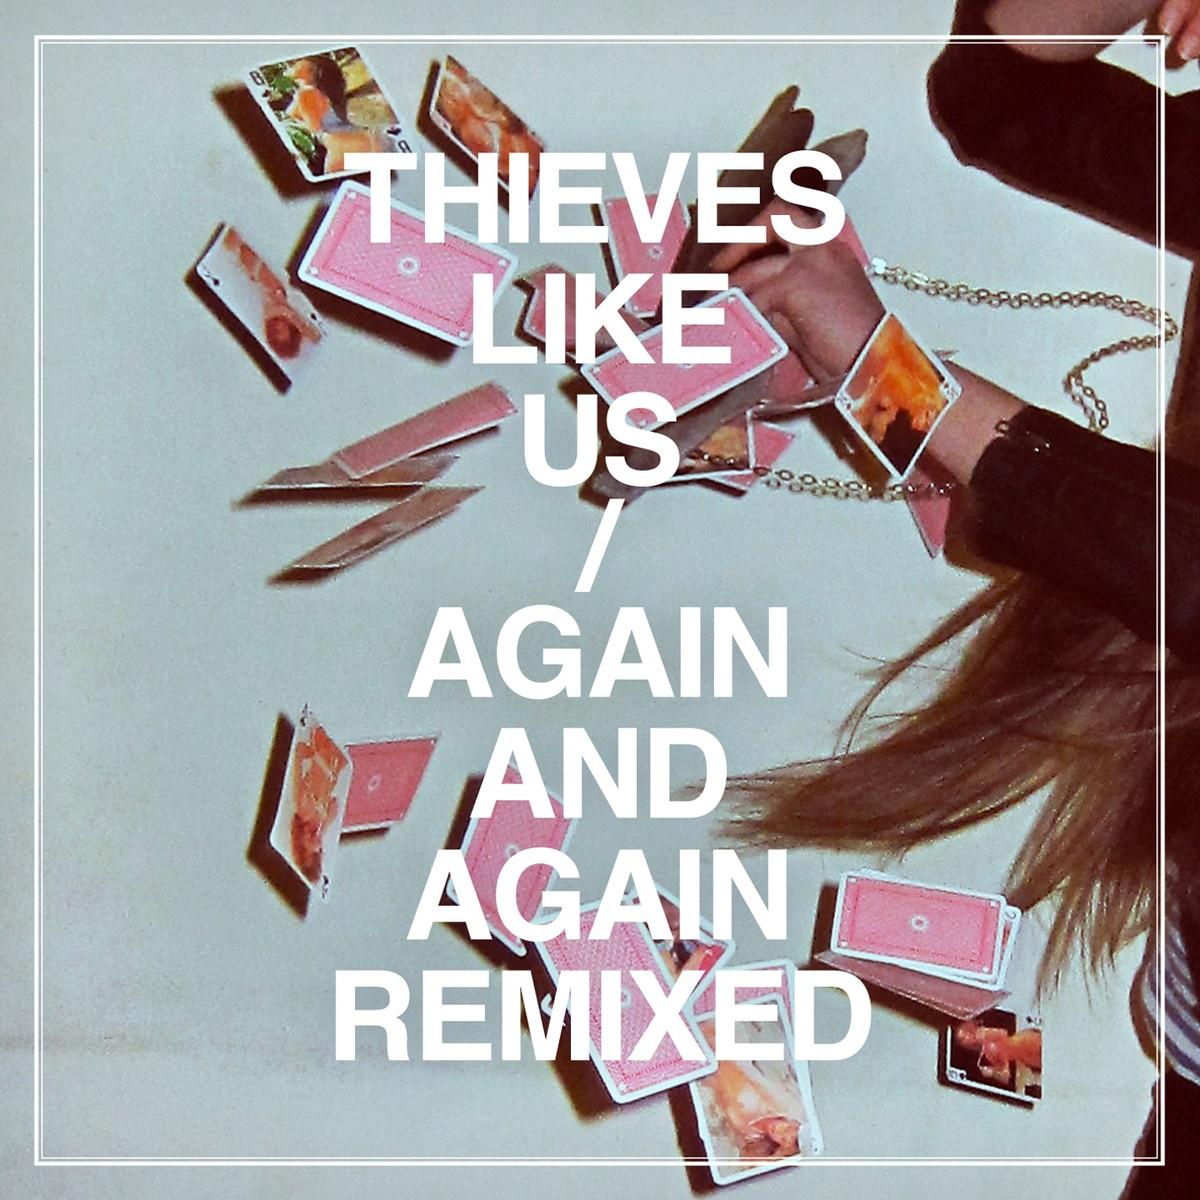 Thieves Like Us - One Night With You (Retraite Remix)